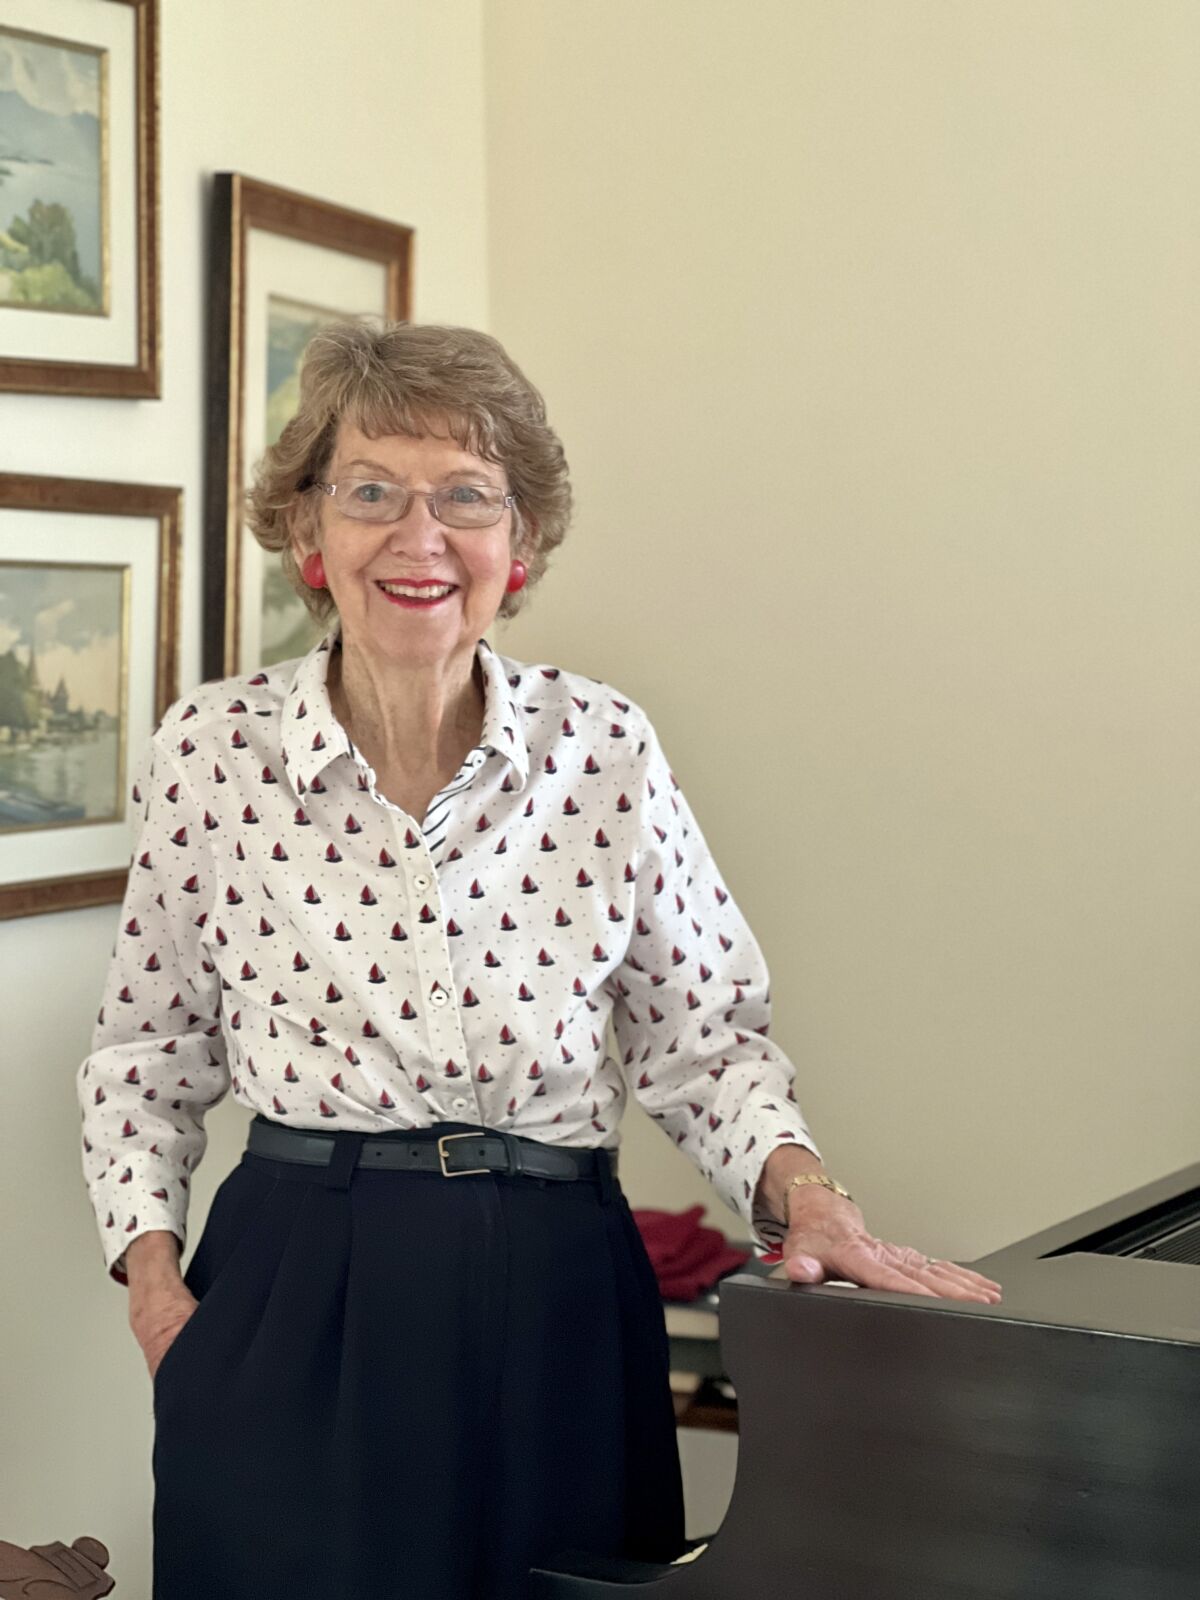 La Jolla resident Ann Marie Haney has volunteered for decades to try to improve music education in San Diego public schools.